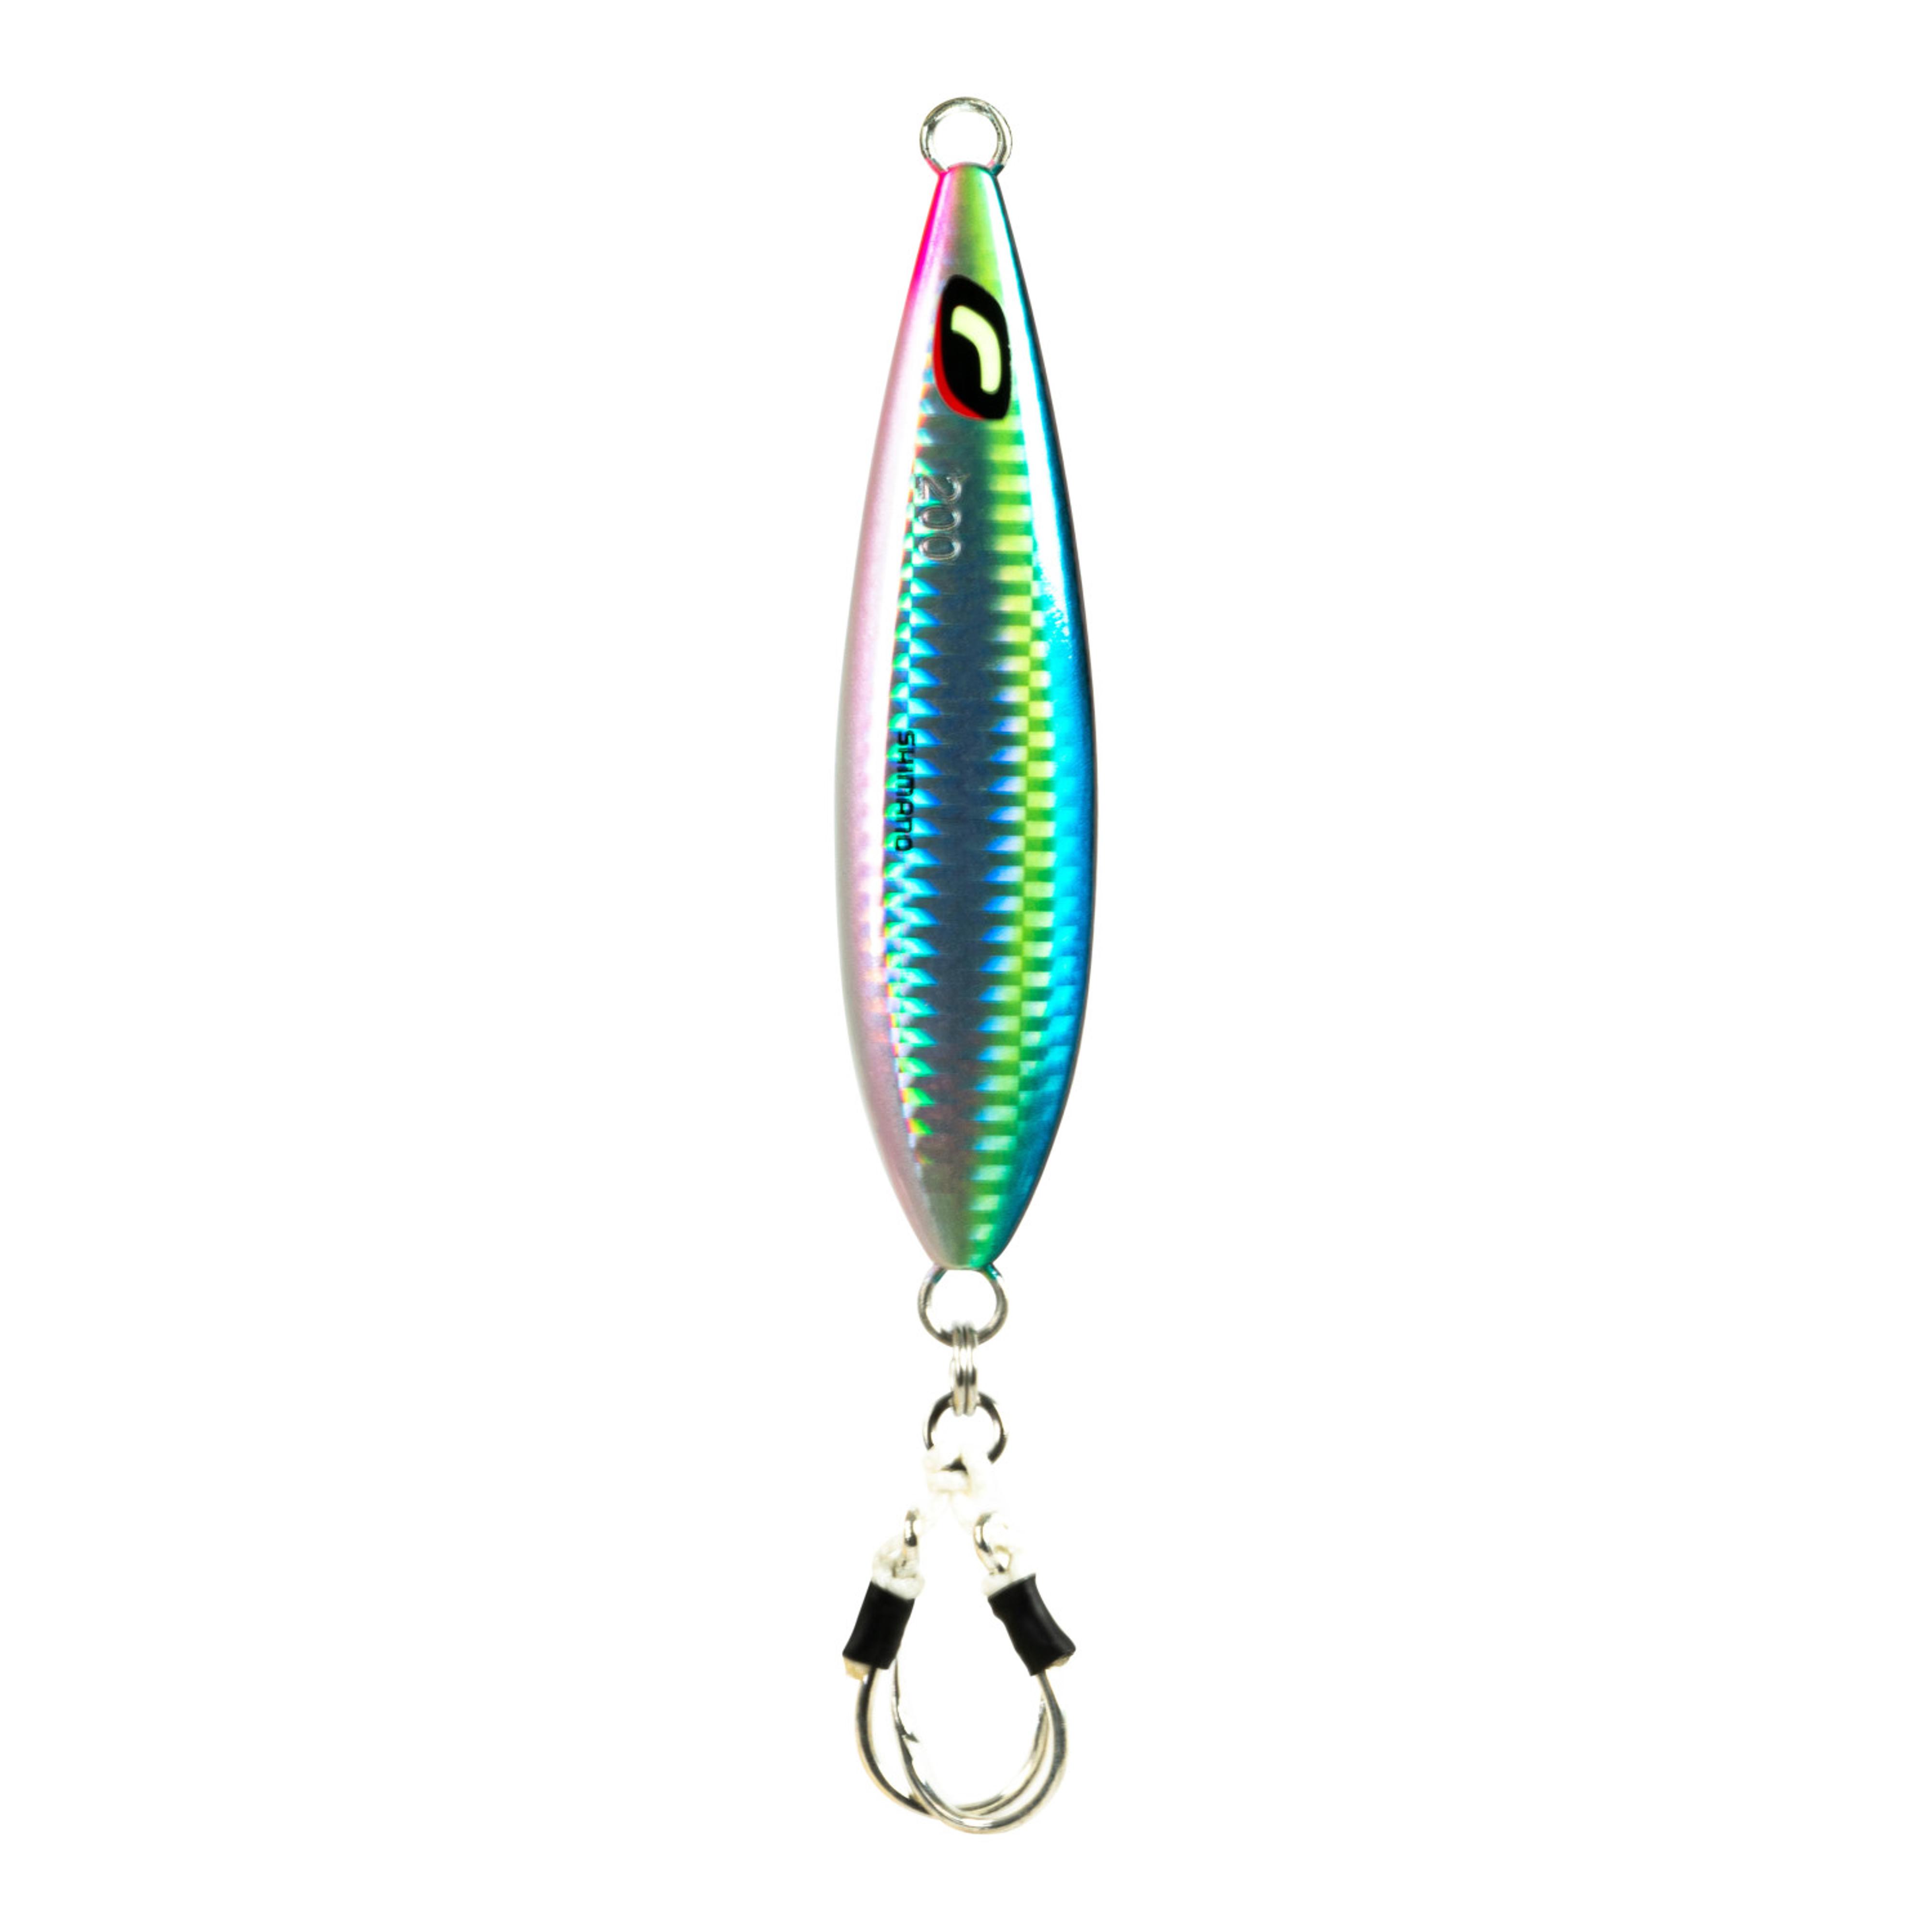 Dartspin Lures & Protect Your Tail ft.Brent Schirmer - 727 Angler